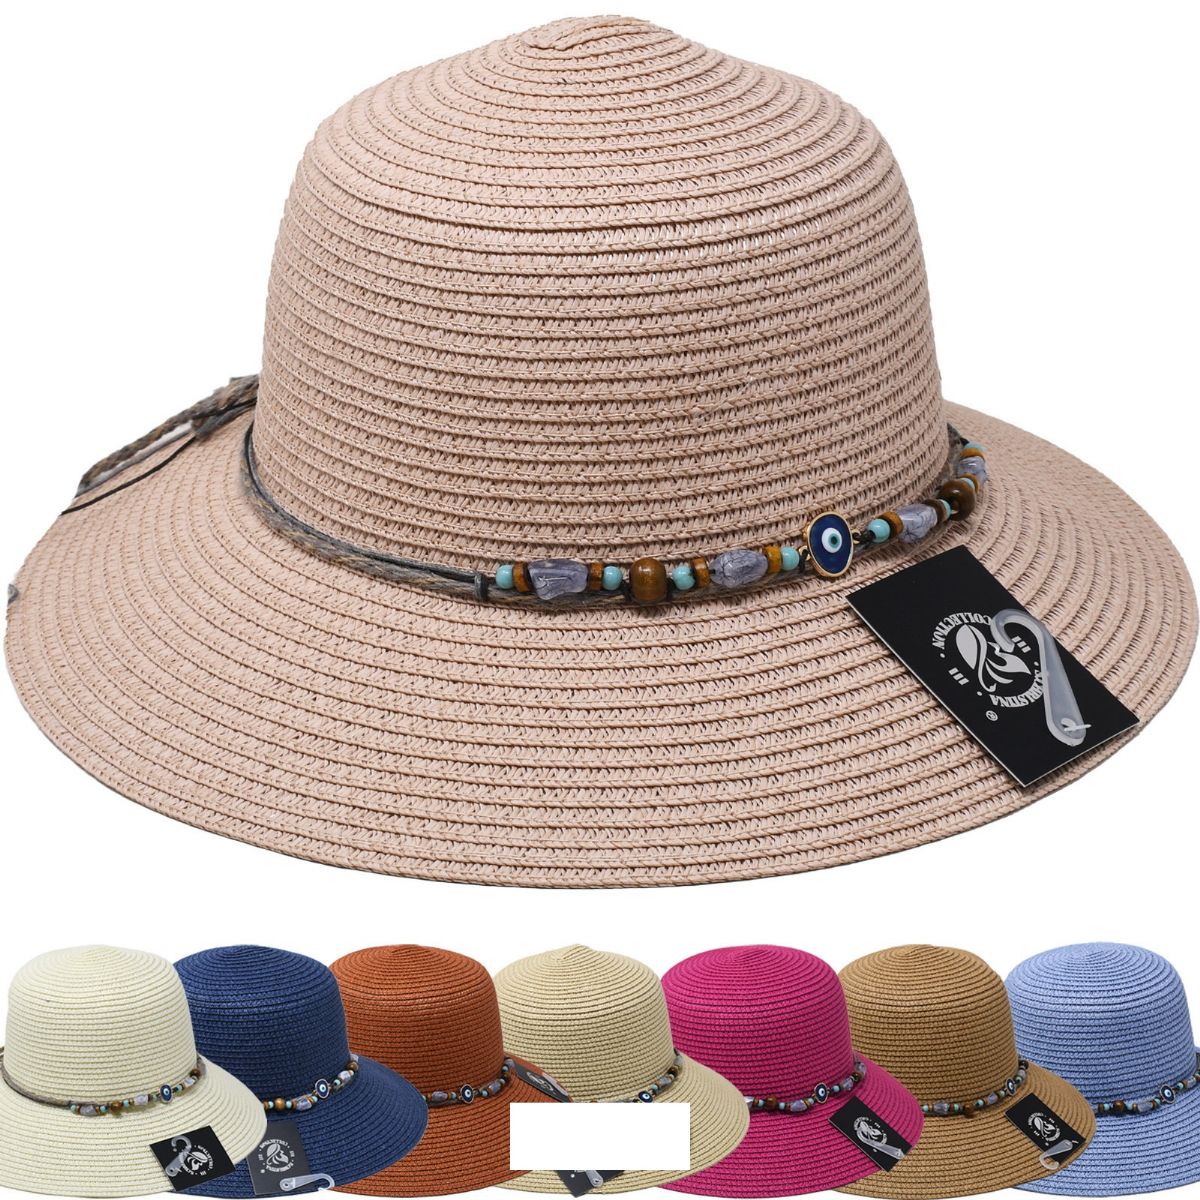 12 Pieces of Beach Hat With Sea Shell Band